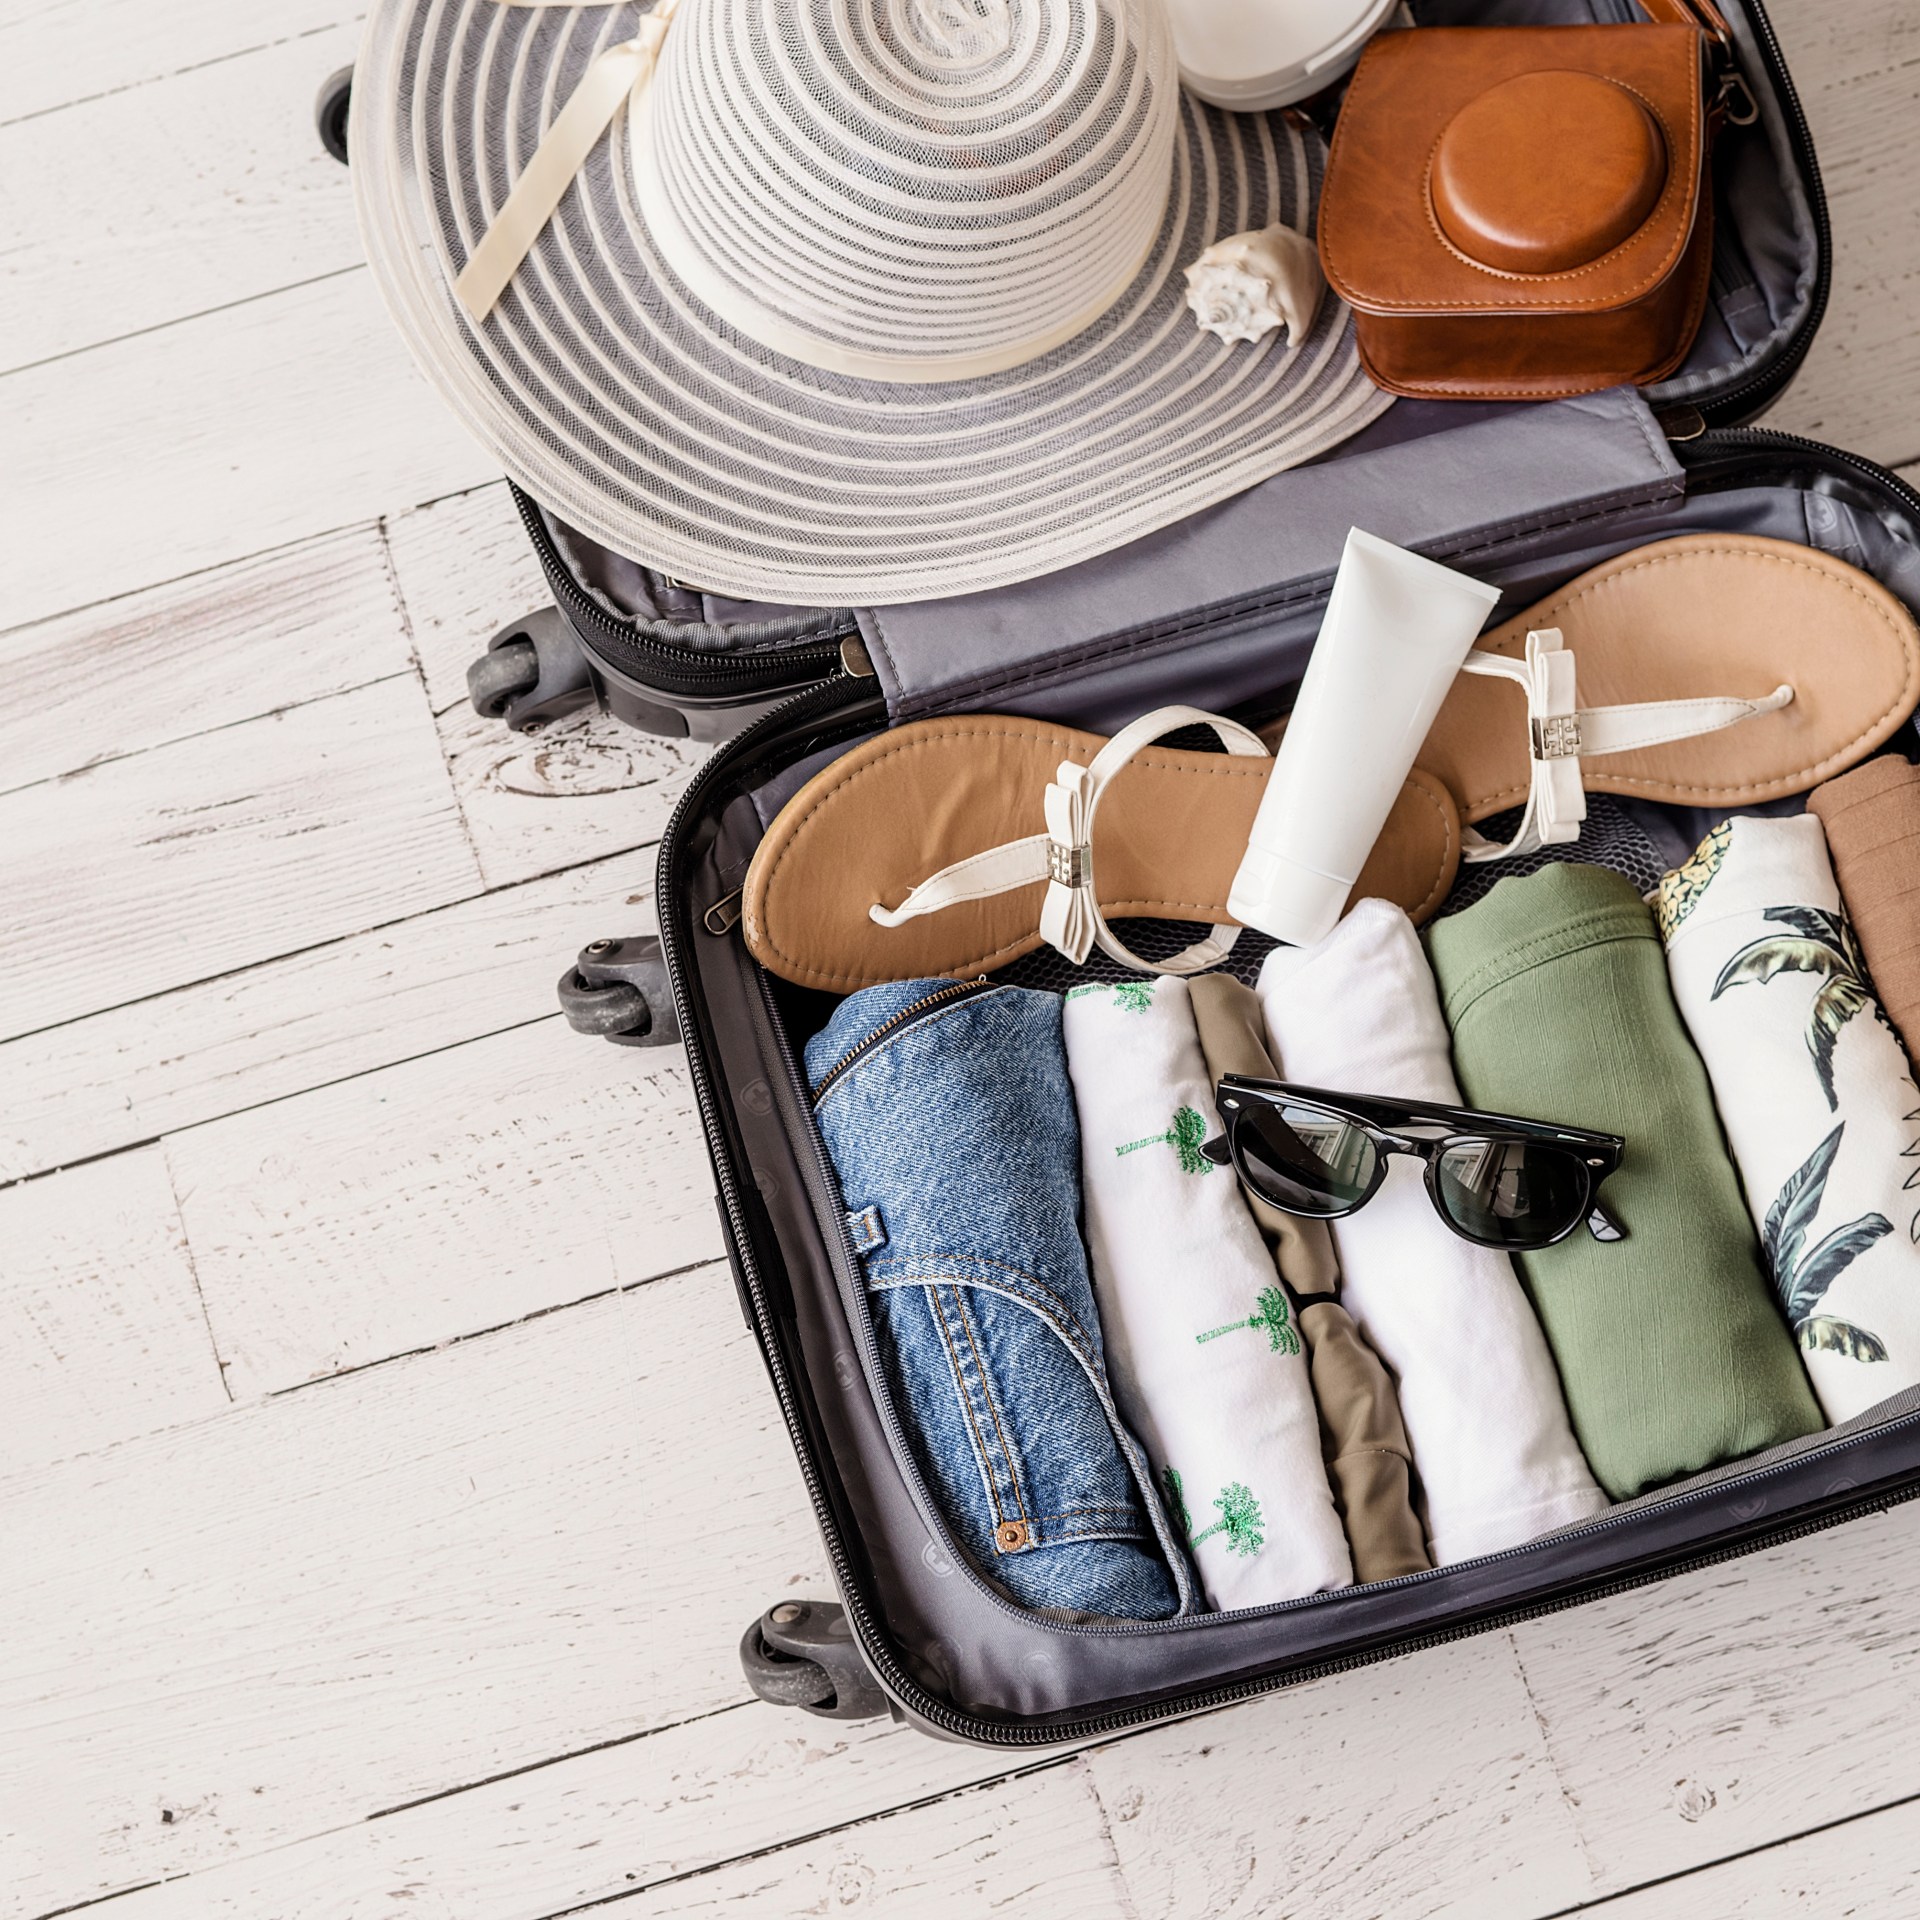 Luggage,And,Suitcase,Packing,For,Vacation,On,White,Wooden,Background